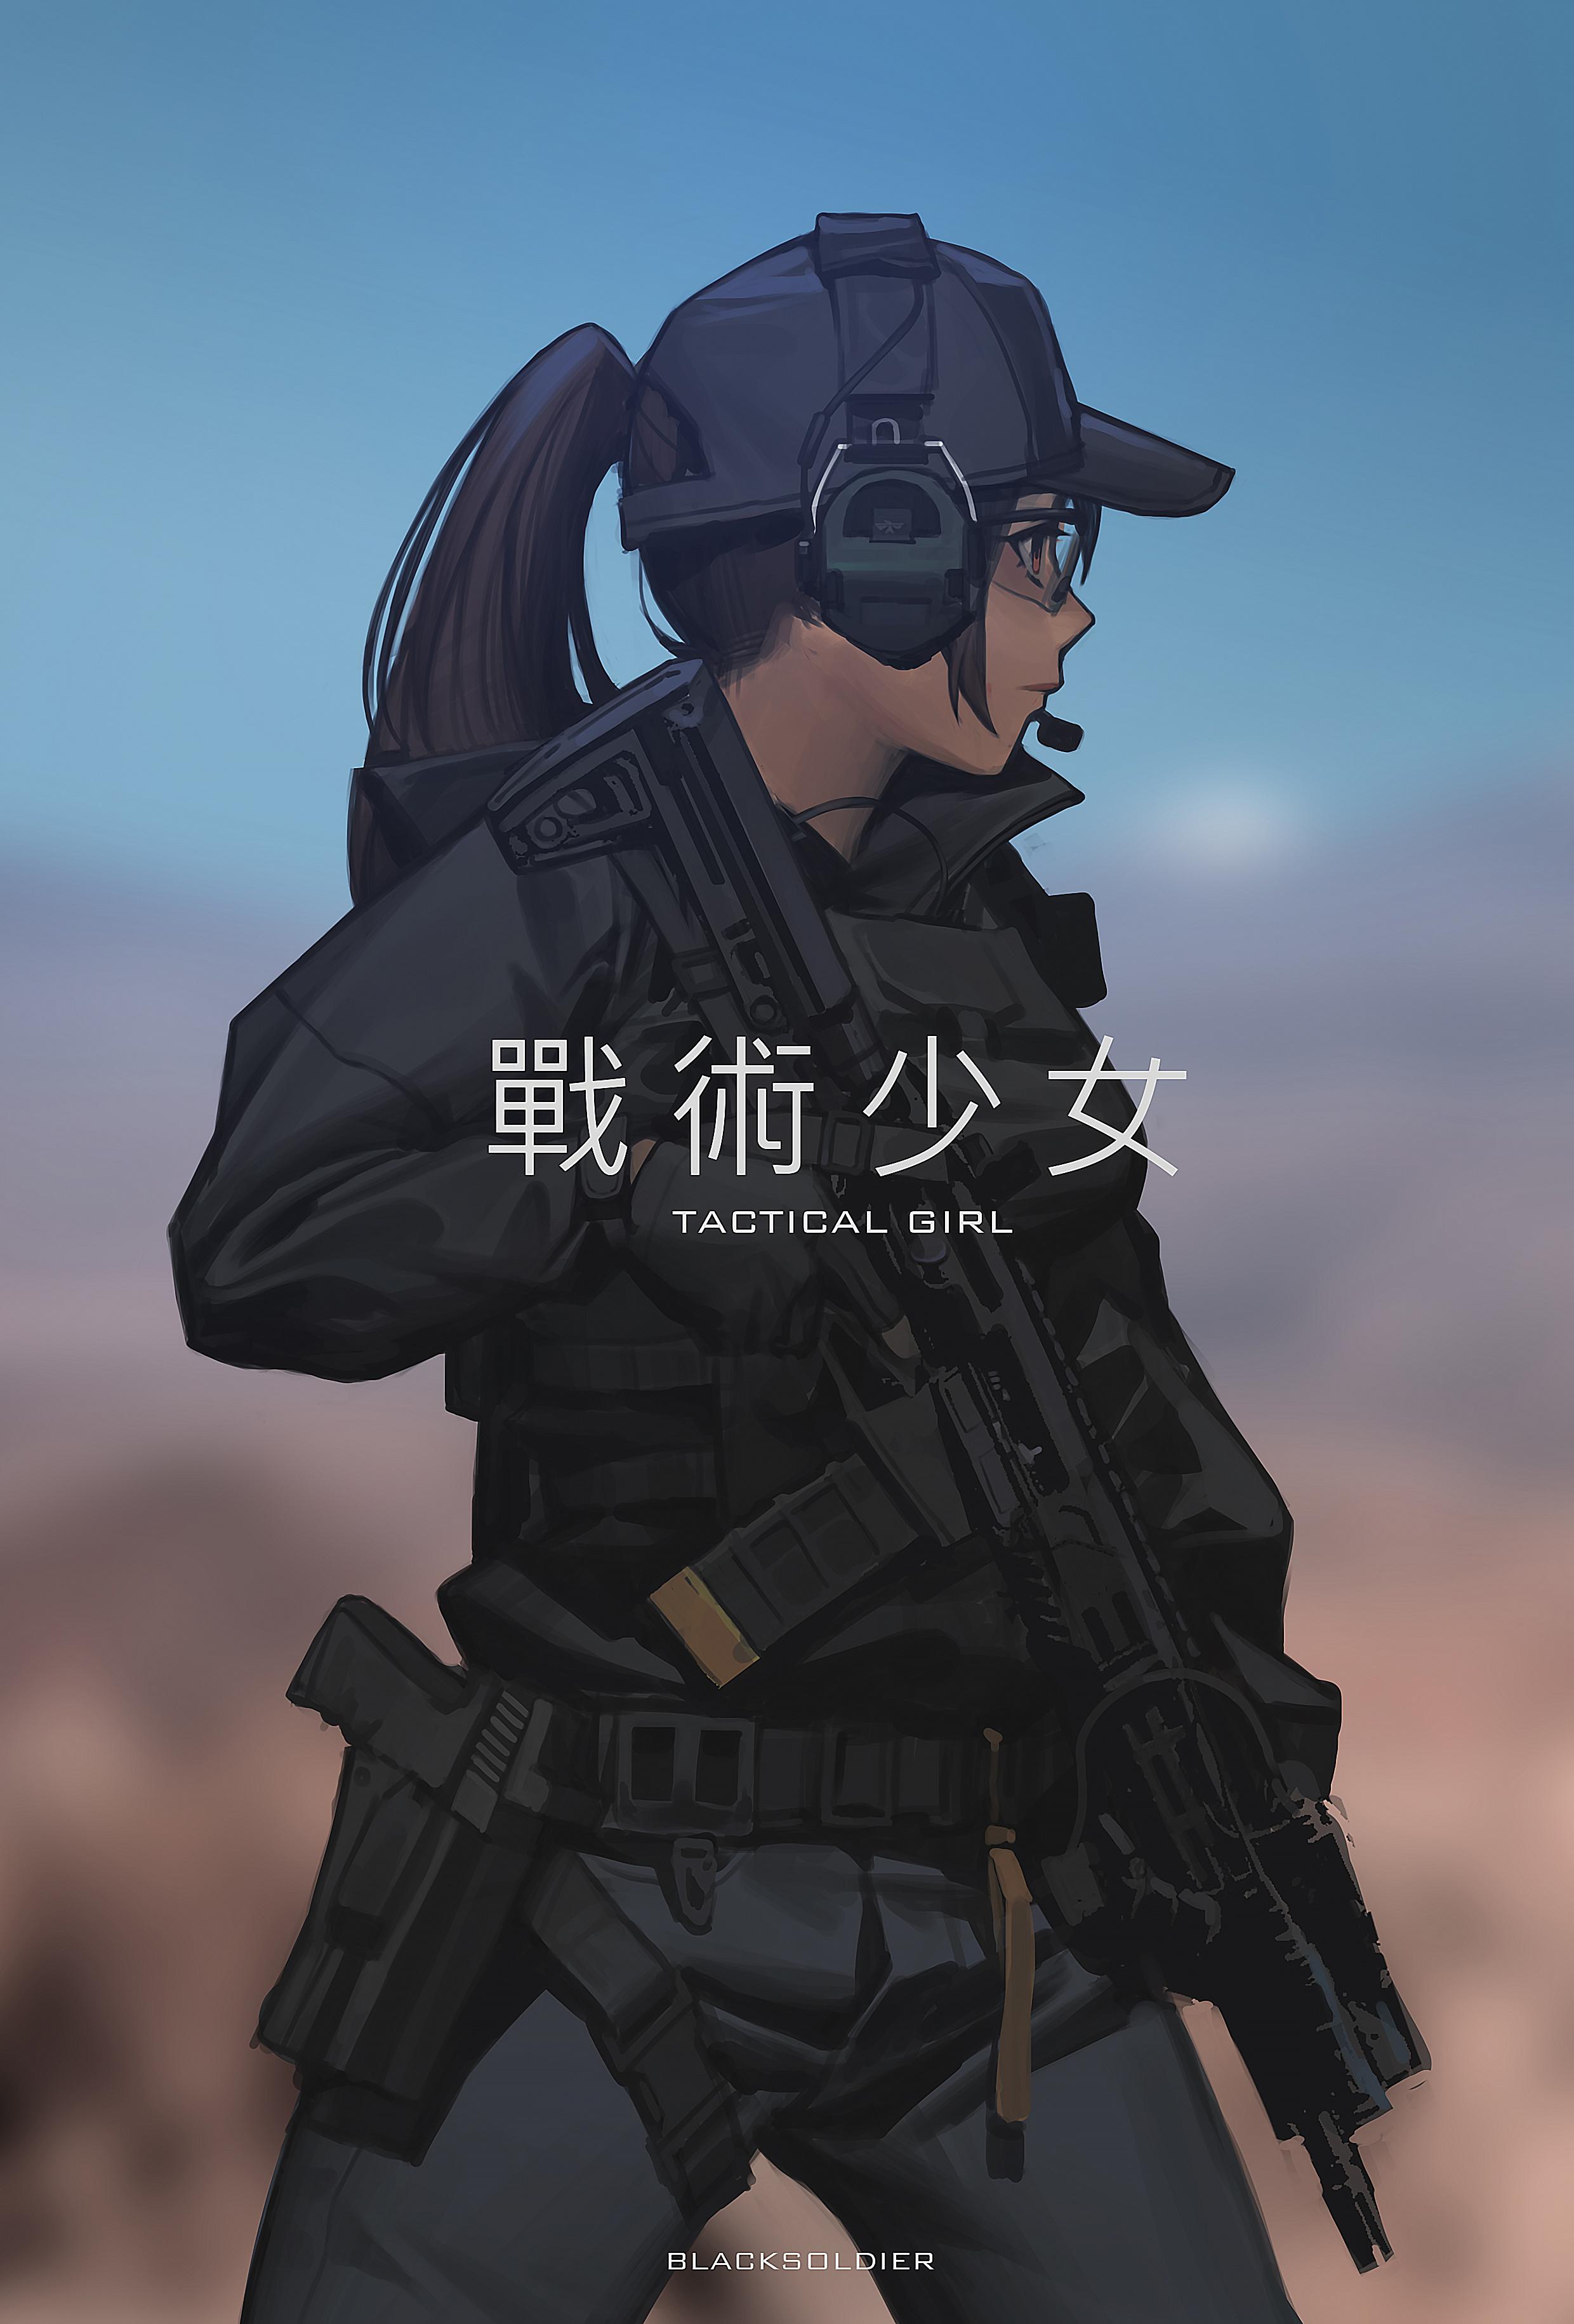 Anime Girls Tactical Special Forces Gun Vertical Rifles Black Soldier 2480x3661